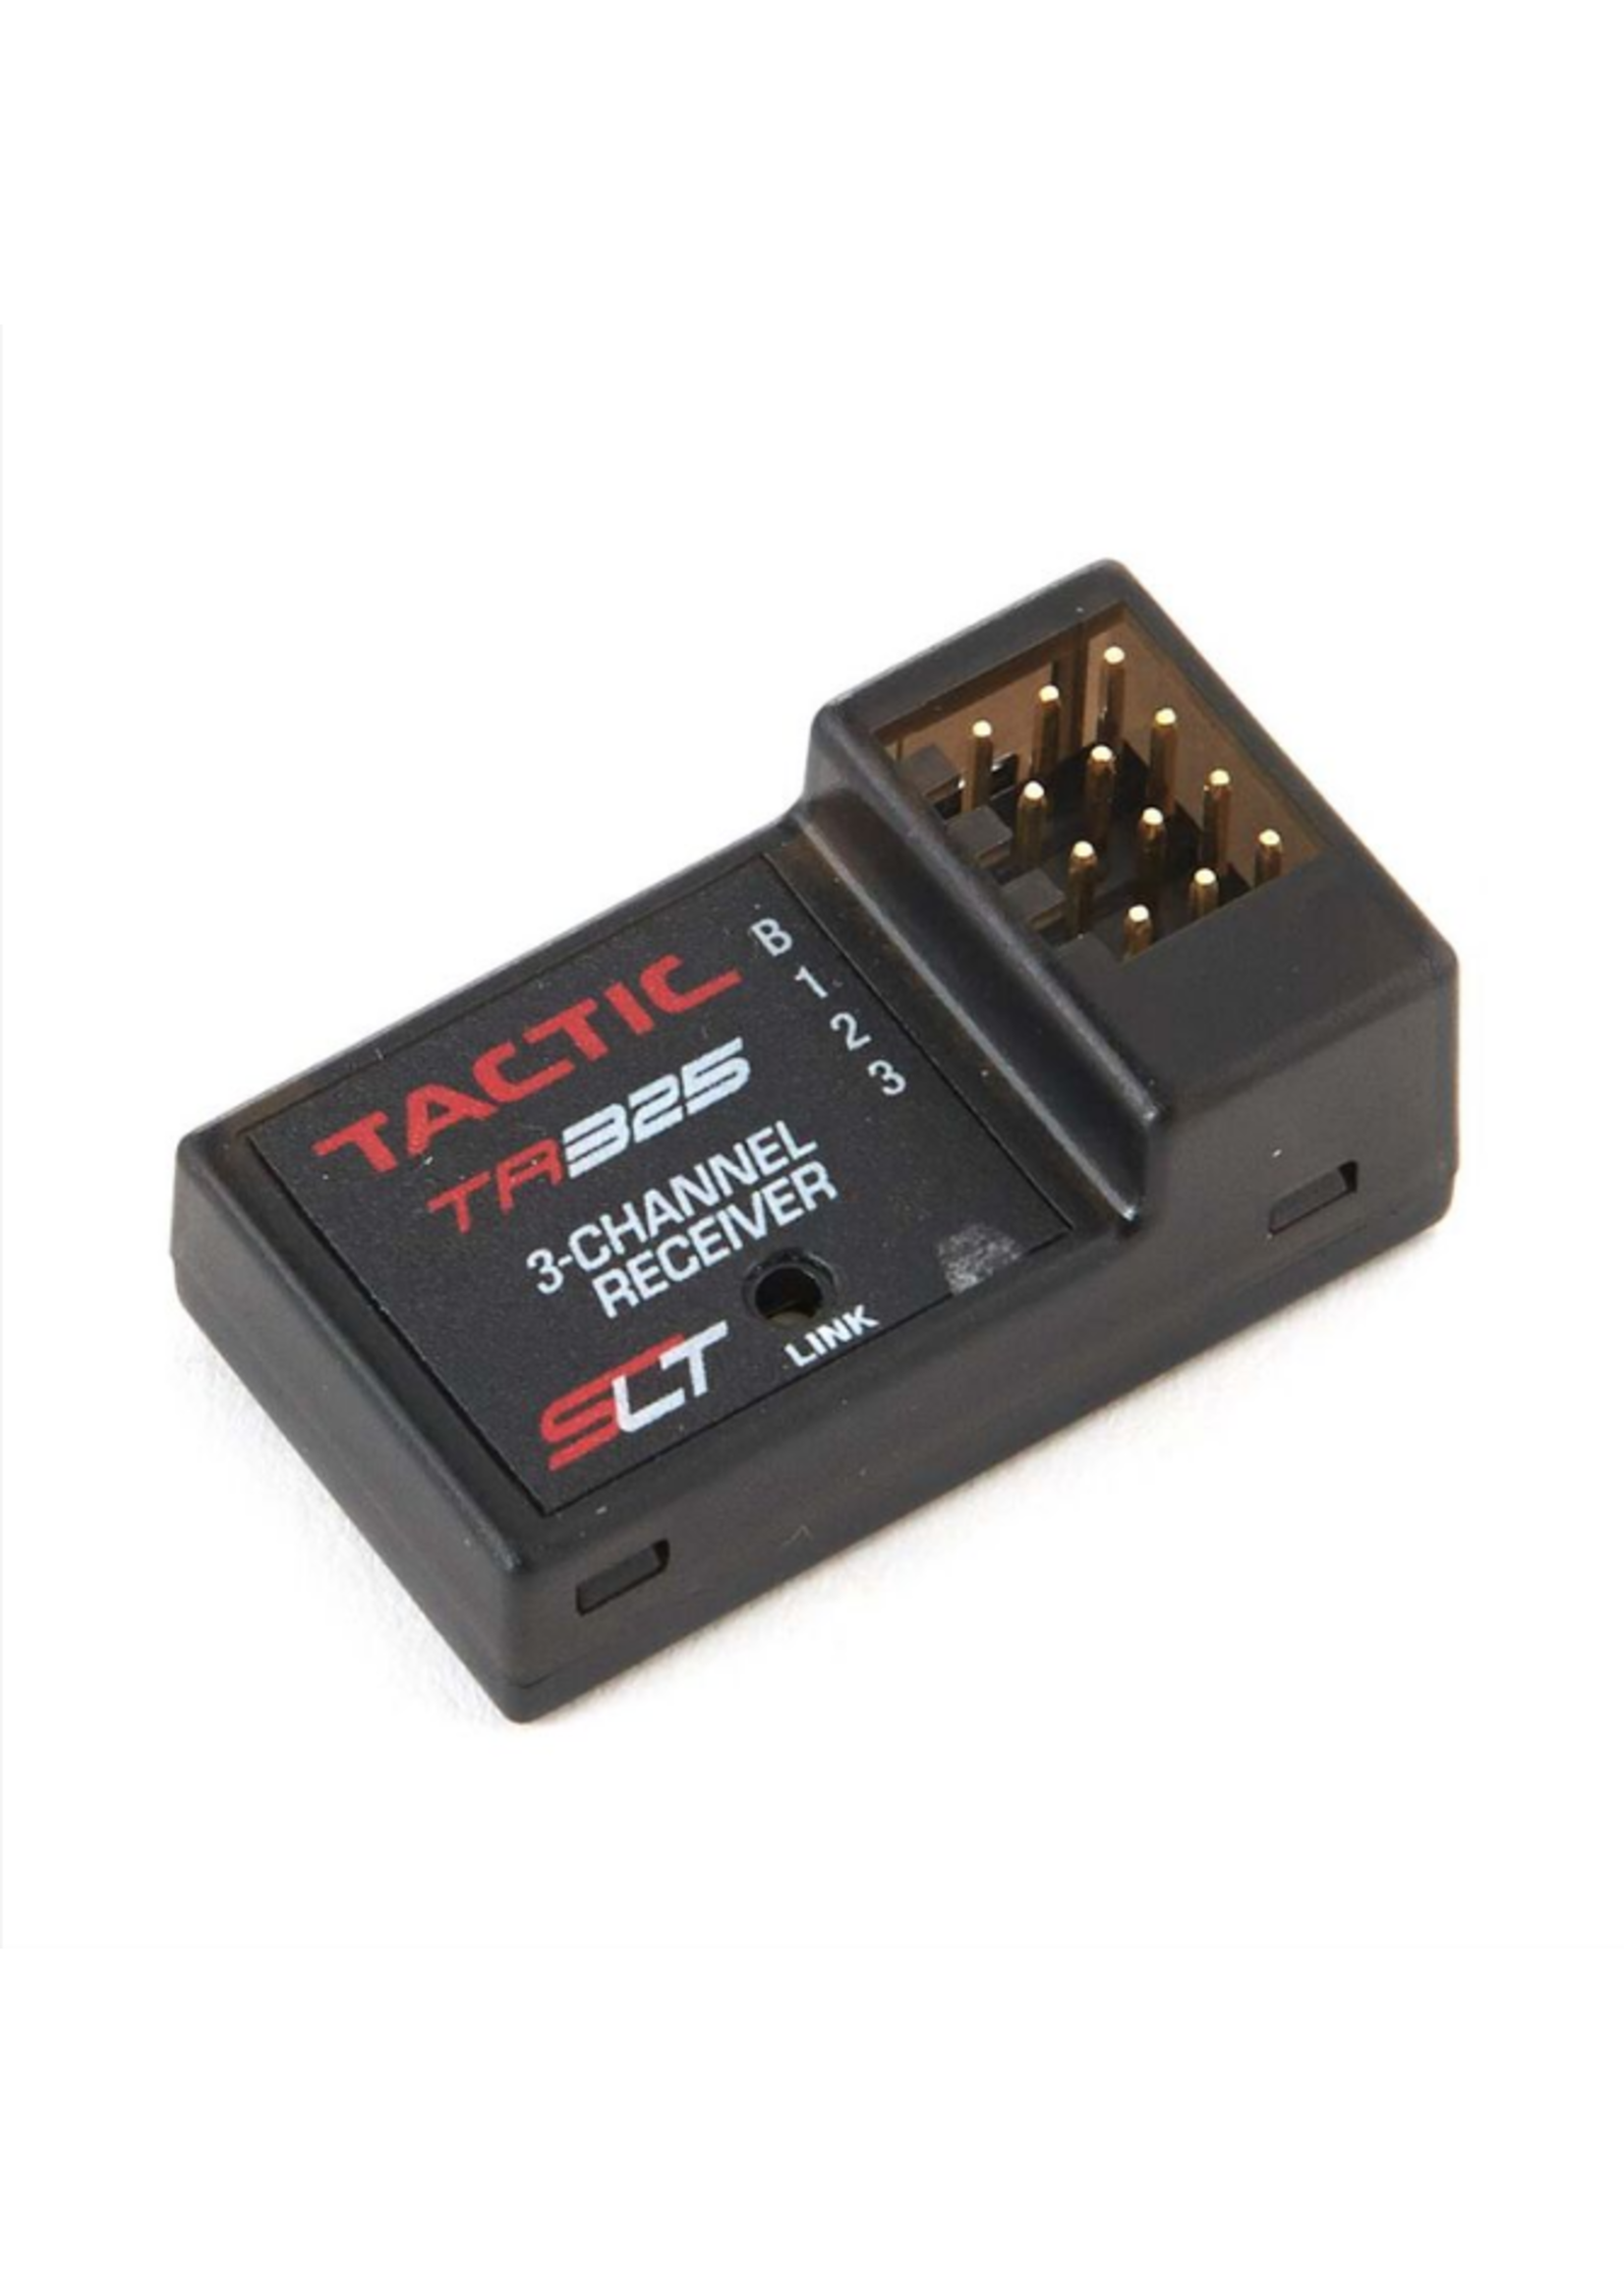 Tactic TACL0325 Tactic TR325 3-Channel Receiver